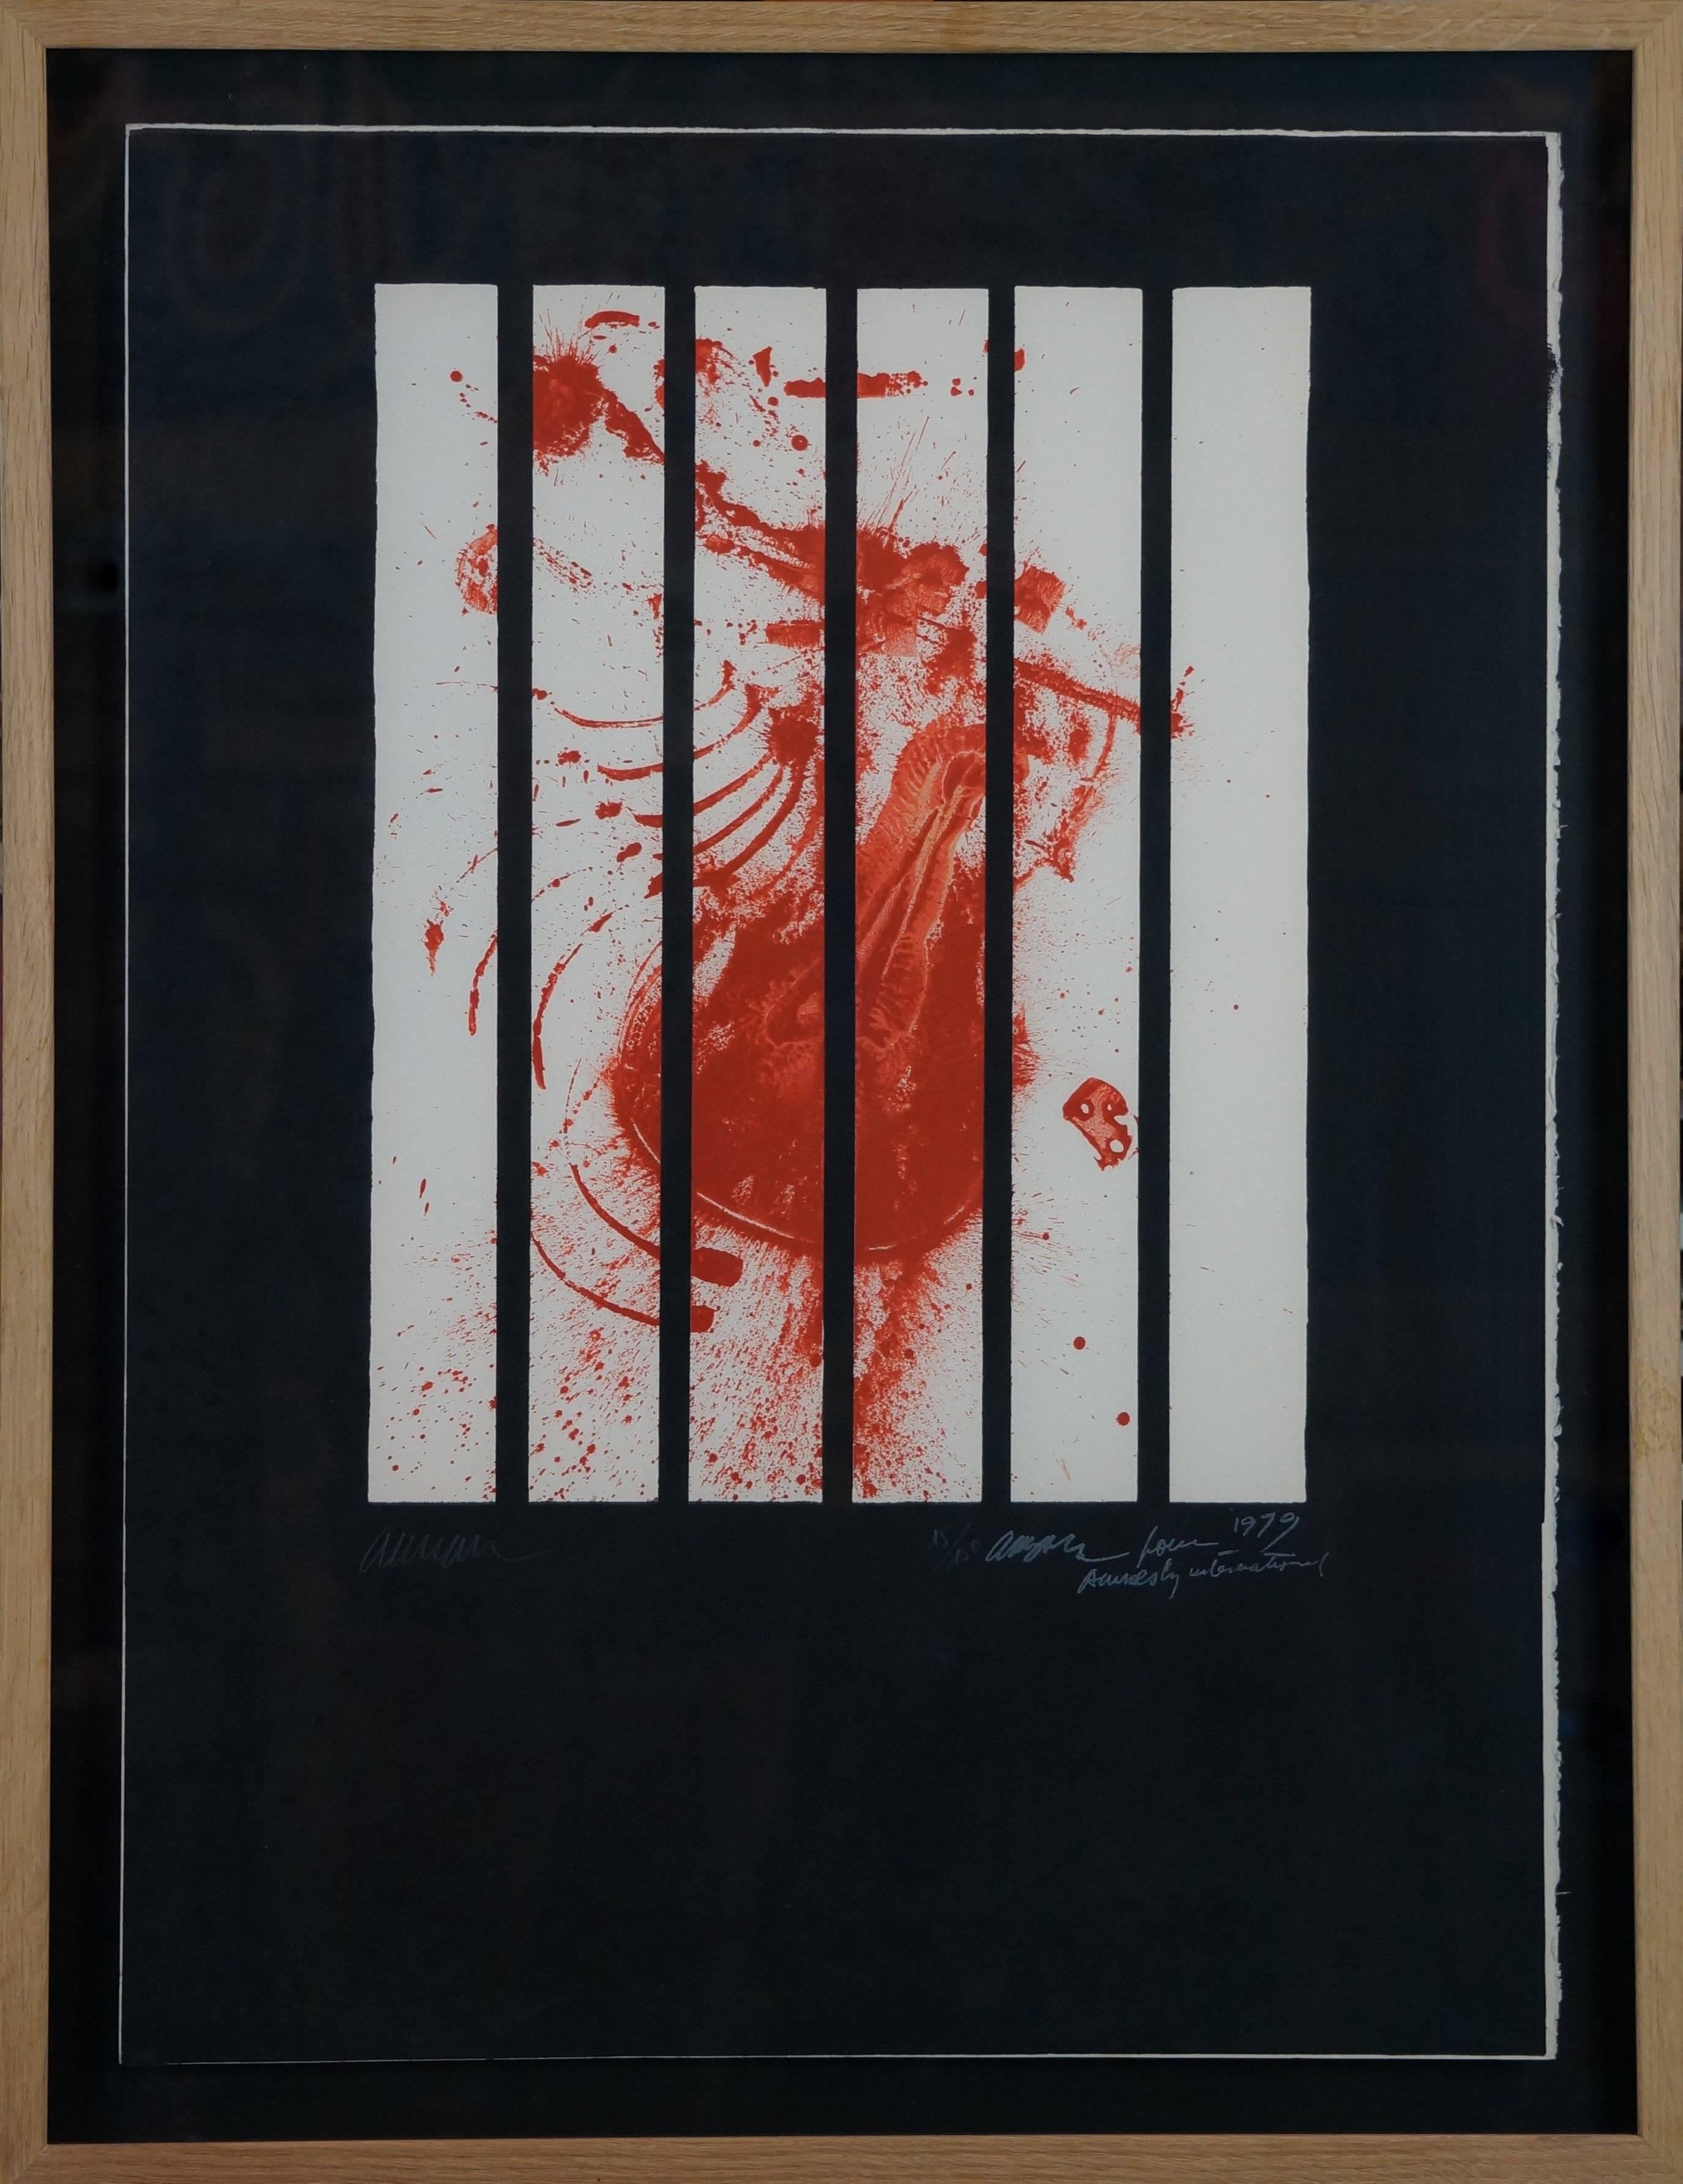 Arman Abstract Print - Abstract Composition AI, 1979 - litograph, 86x66 cm, framed